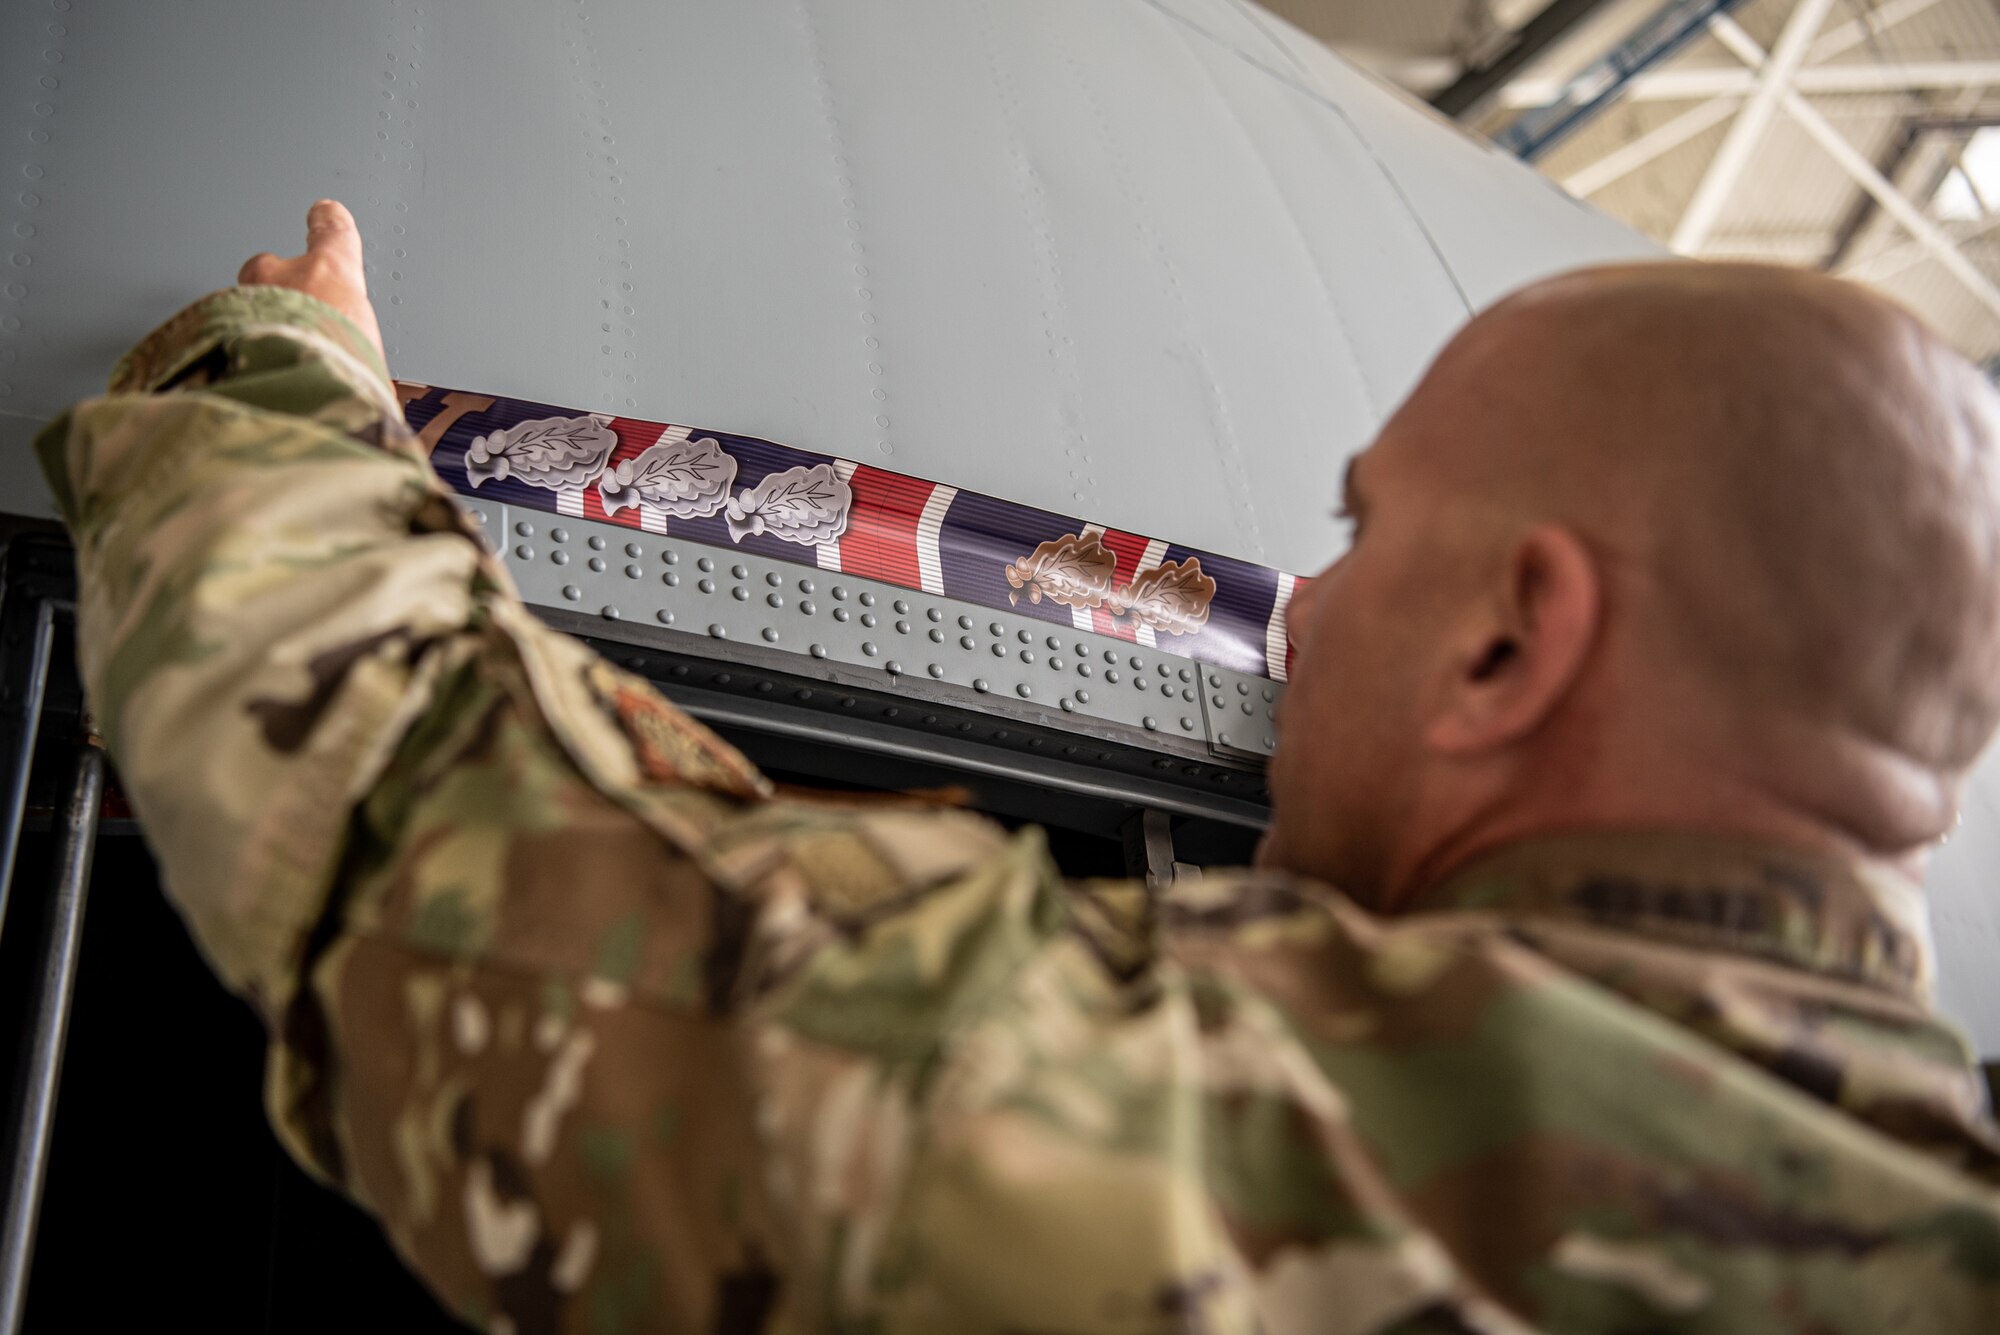 Chief Master Sgt. Tim Kenney, aircraft structural repair shop chief for the 123rd Maintenance Group, applies a decal depicting the 123rd Airlift Wing’s 19 Outstanding Unit Awards above the crew door of one of the Kentucky Air National Guard’s newly acquired C-130J Super Hercules aircraft at Channel Islands Air Guard Station in Port Hueneme, Calif., Nov. 3, 2021. The new aircraft is replacing the C-130H Hercules, which has been in service to the Kentucky Air National Guard since 1992. (U.S. Air National Guard photo by Tech. Sgt. Joshua Horton)